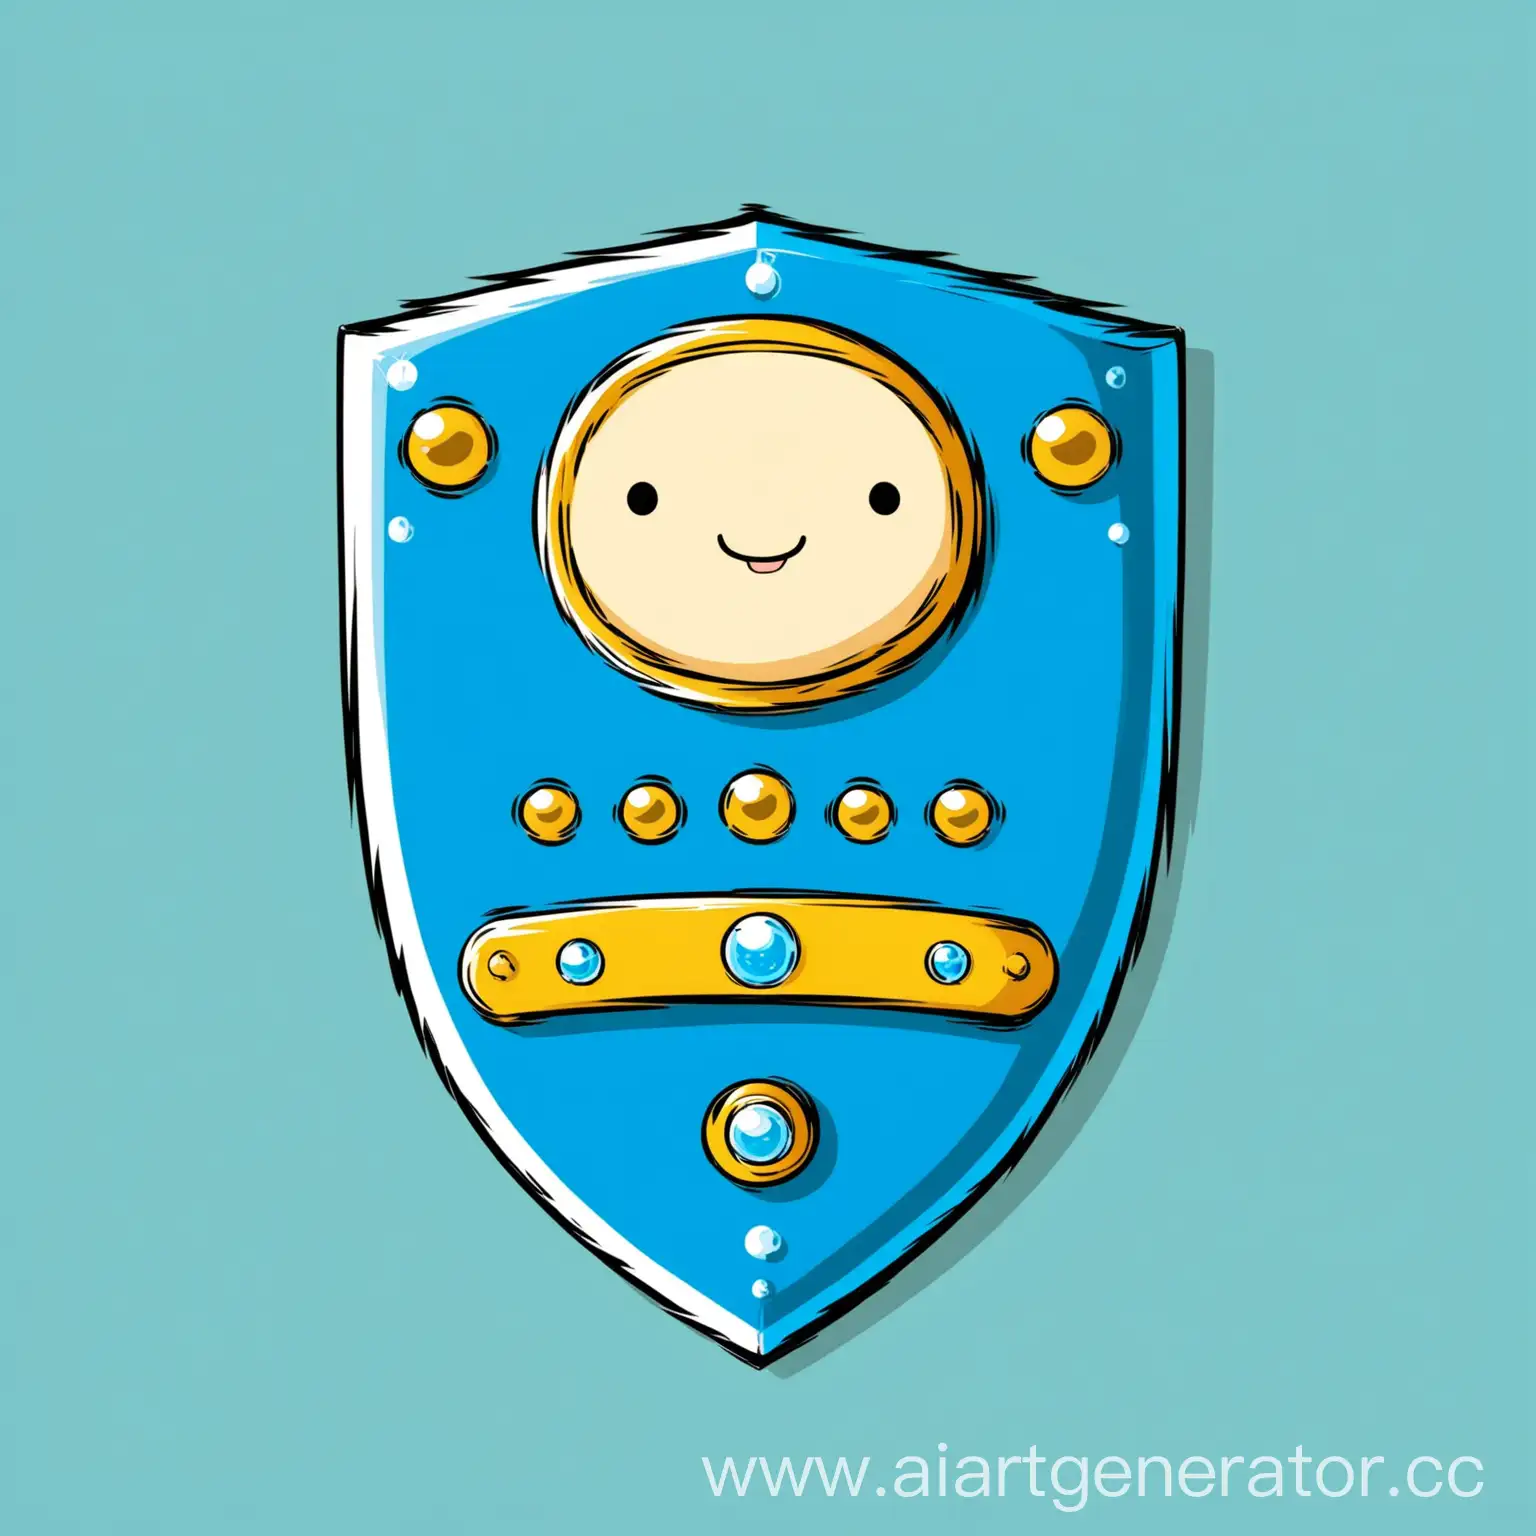 blue shield in adventure time style